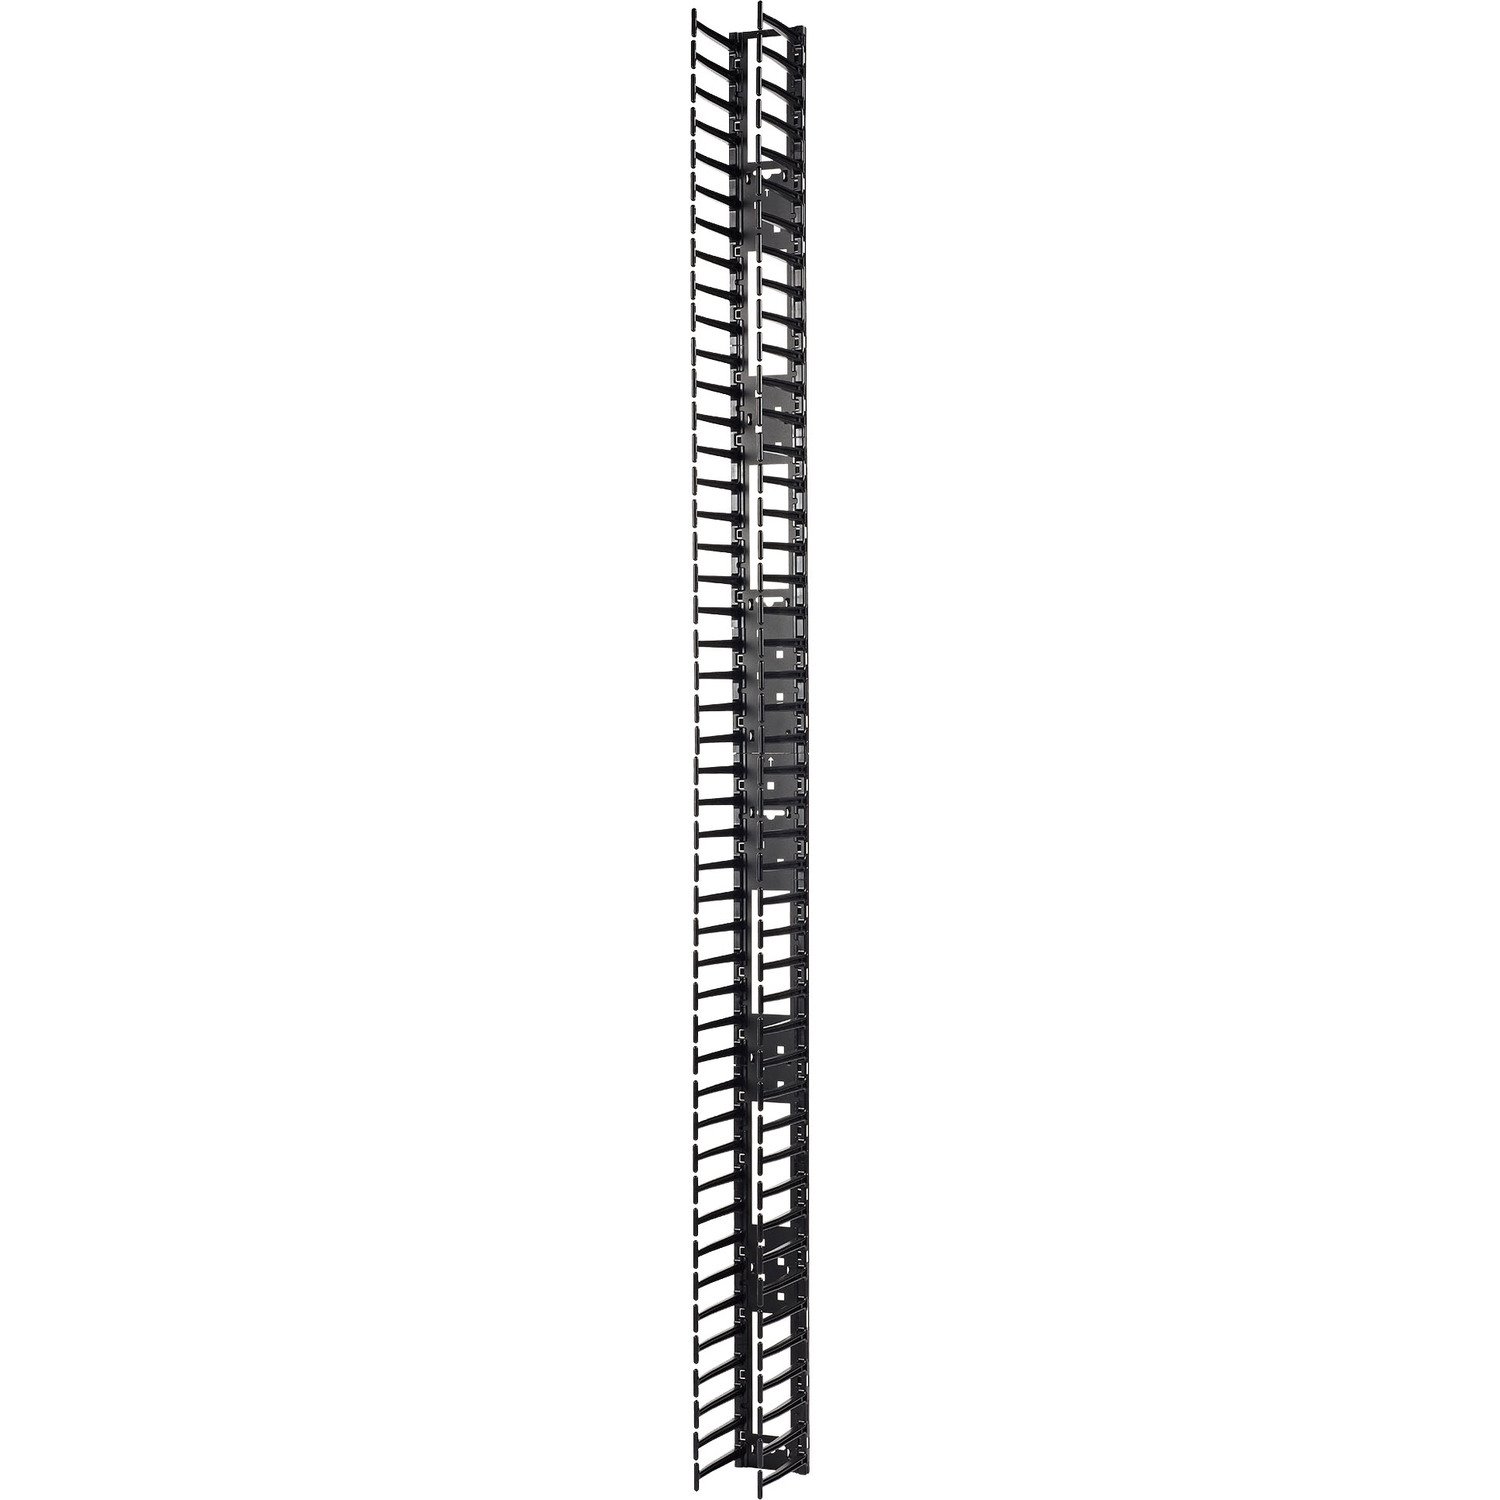 APC by Schneider Electric AR7588 Cable Organizer - Black - 2 Pack